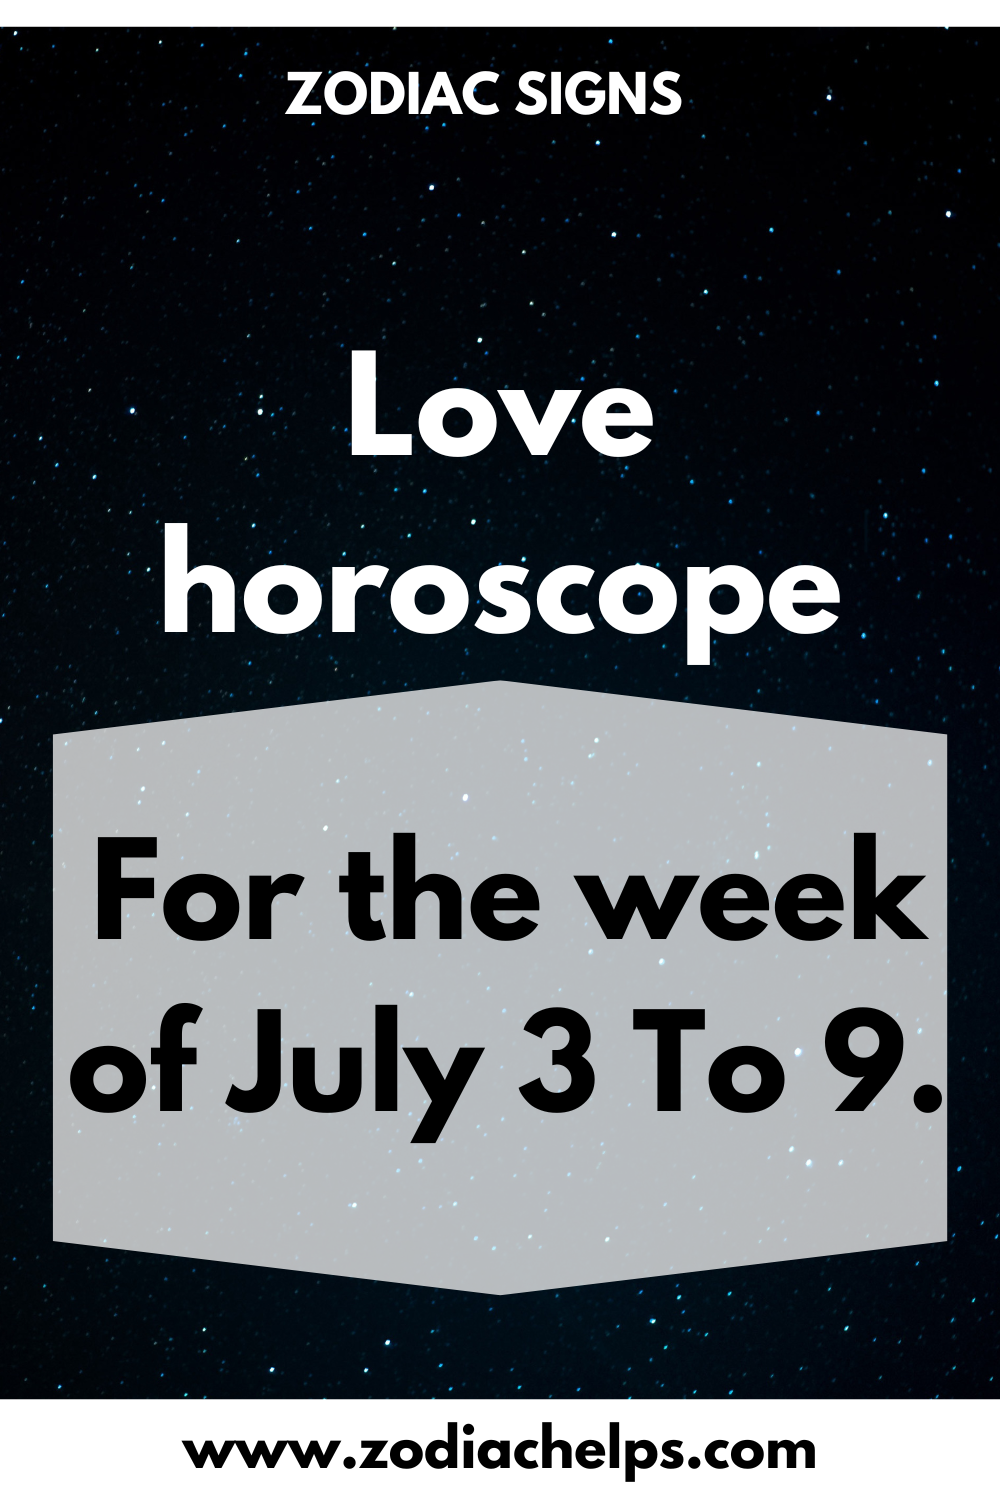 Love horoscope for the week of July 3 To 9.